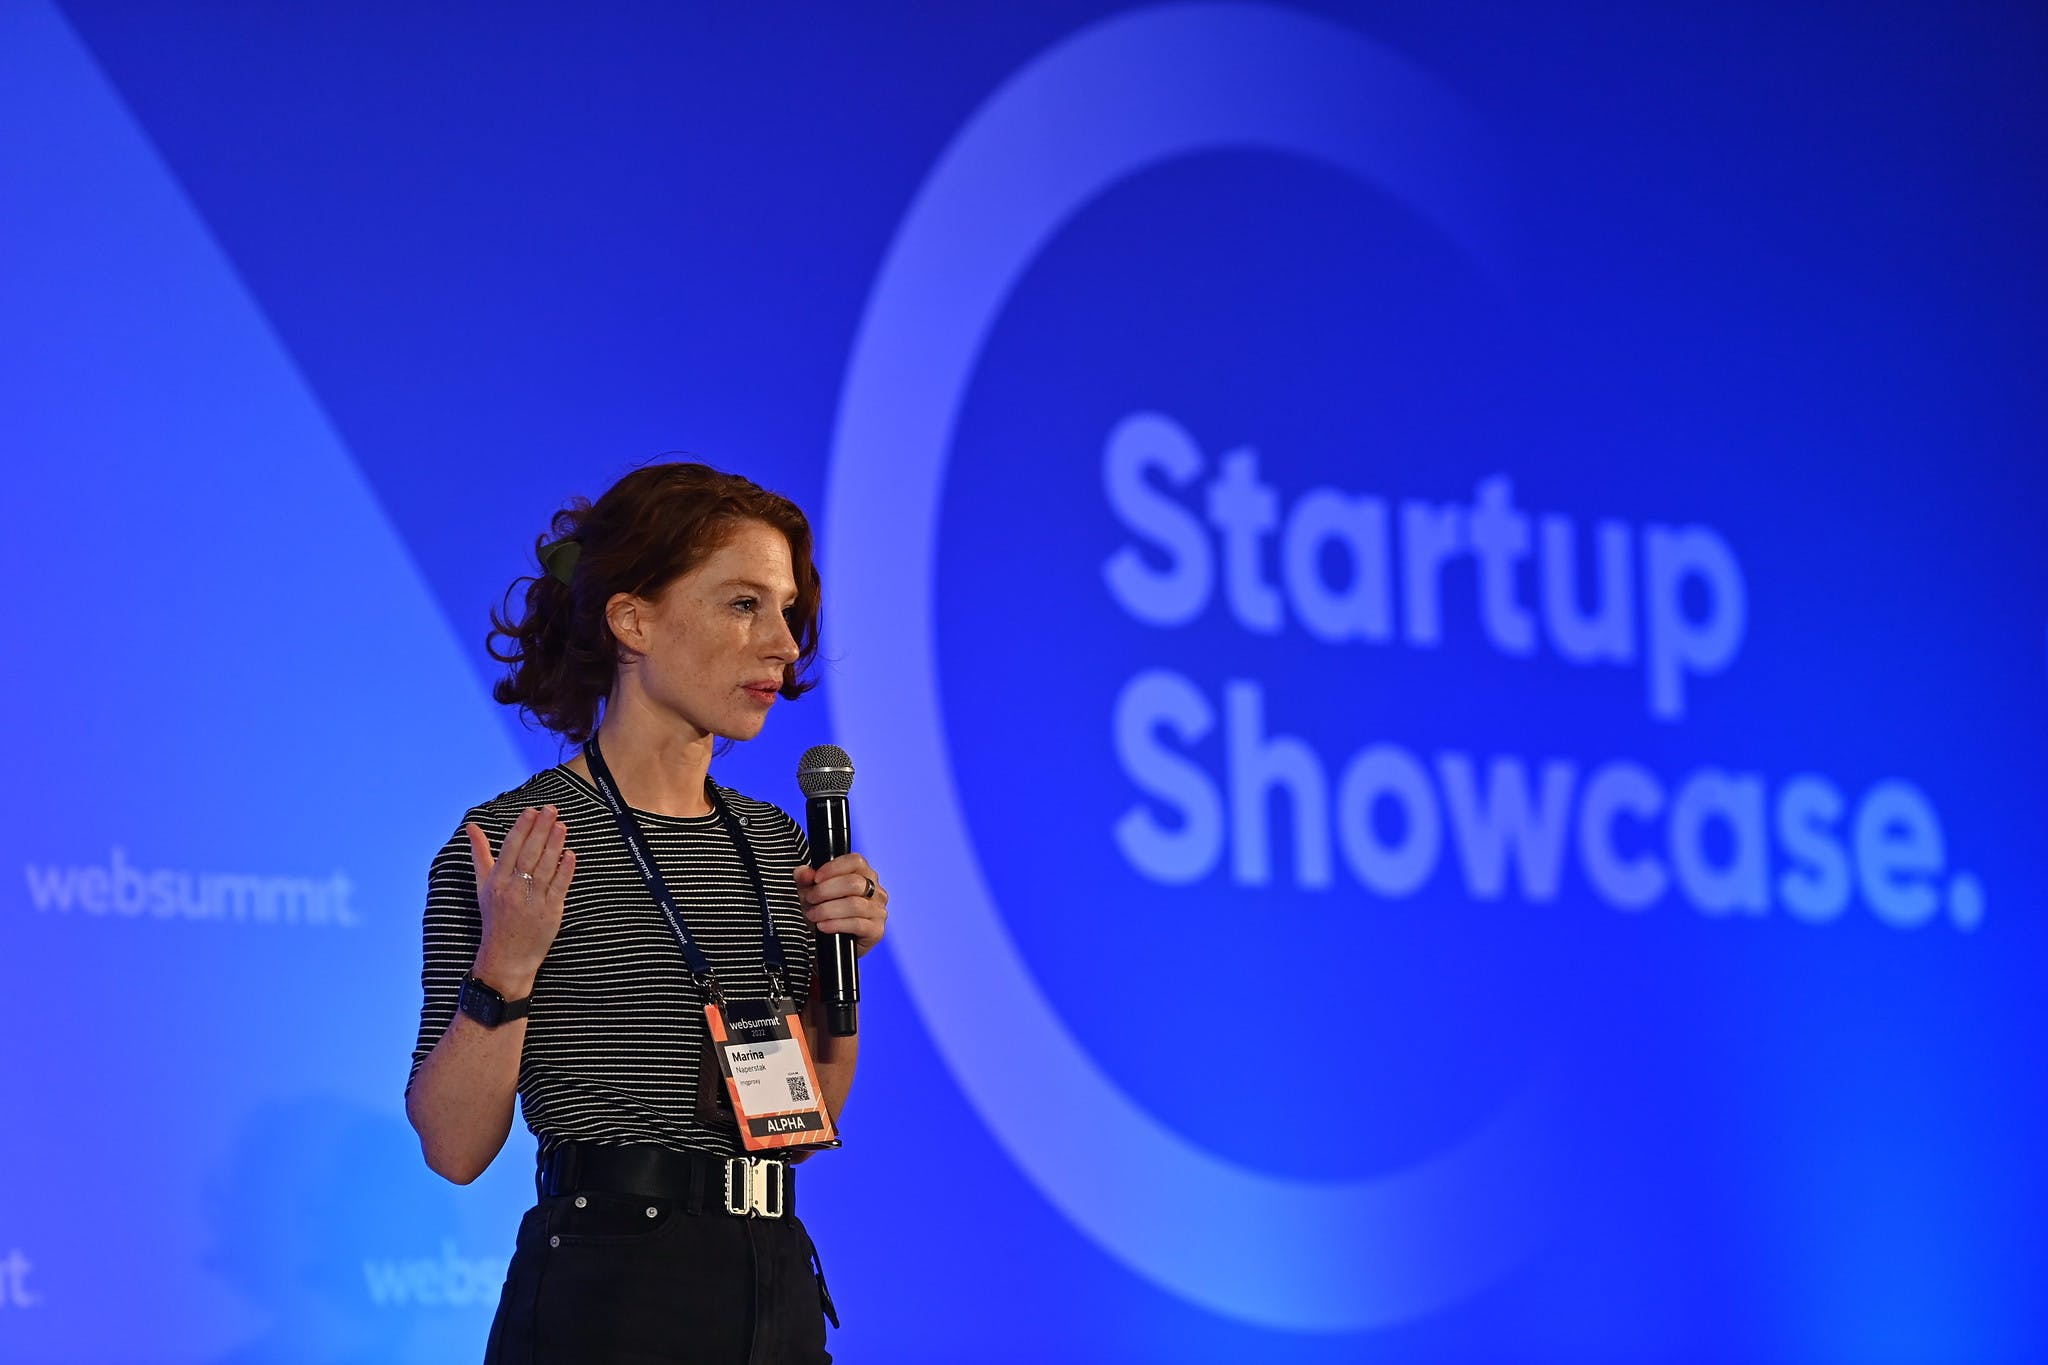 Marina Naperstak, CEO of imgproxy, holding a microphone and assumedly speaking at Startup Showcase Stage during Web Summit 2022.